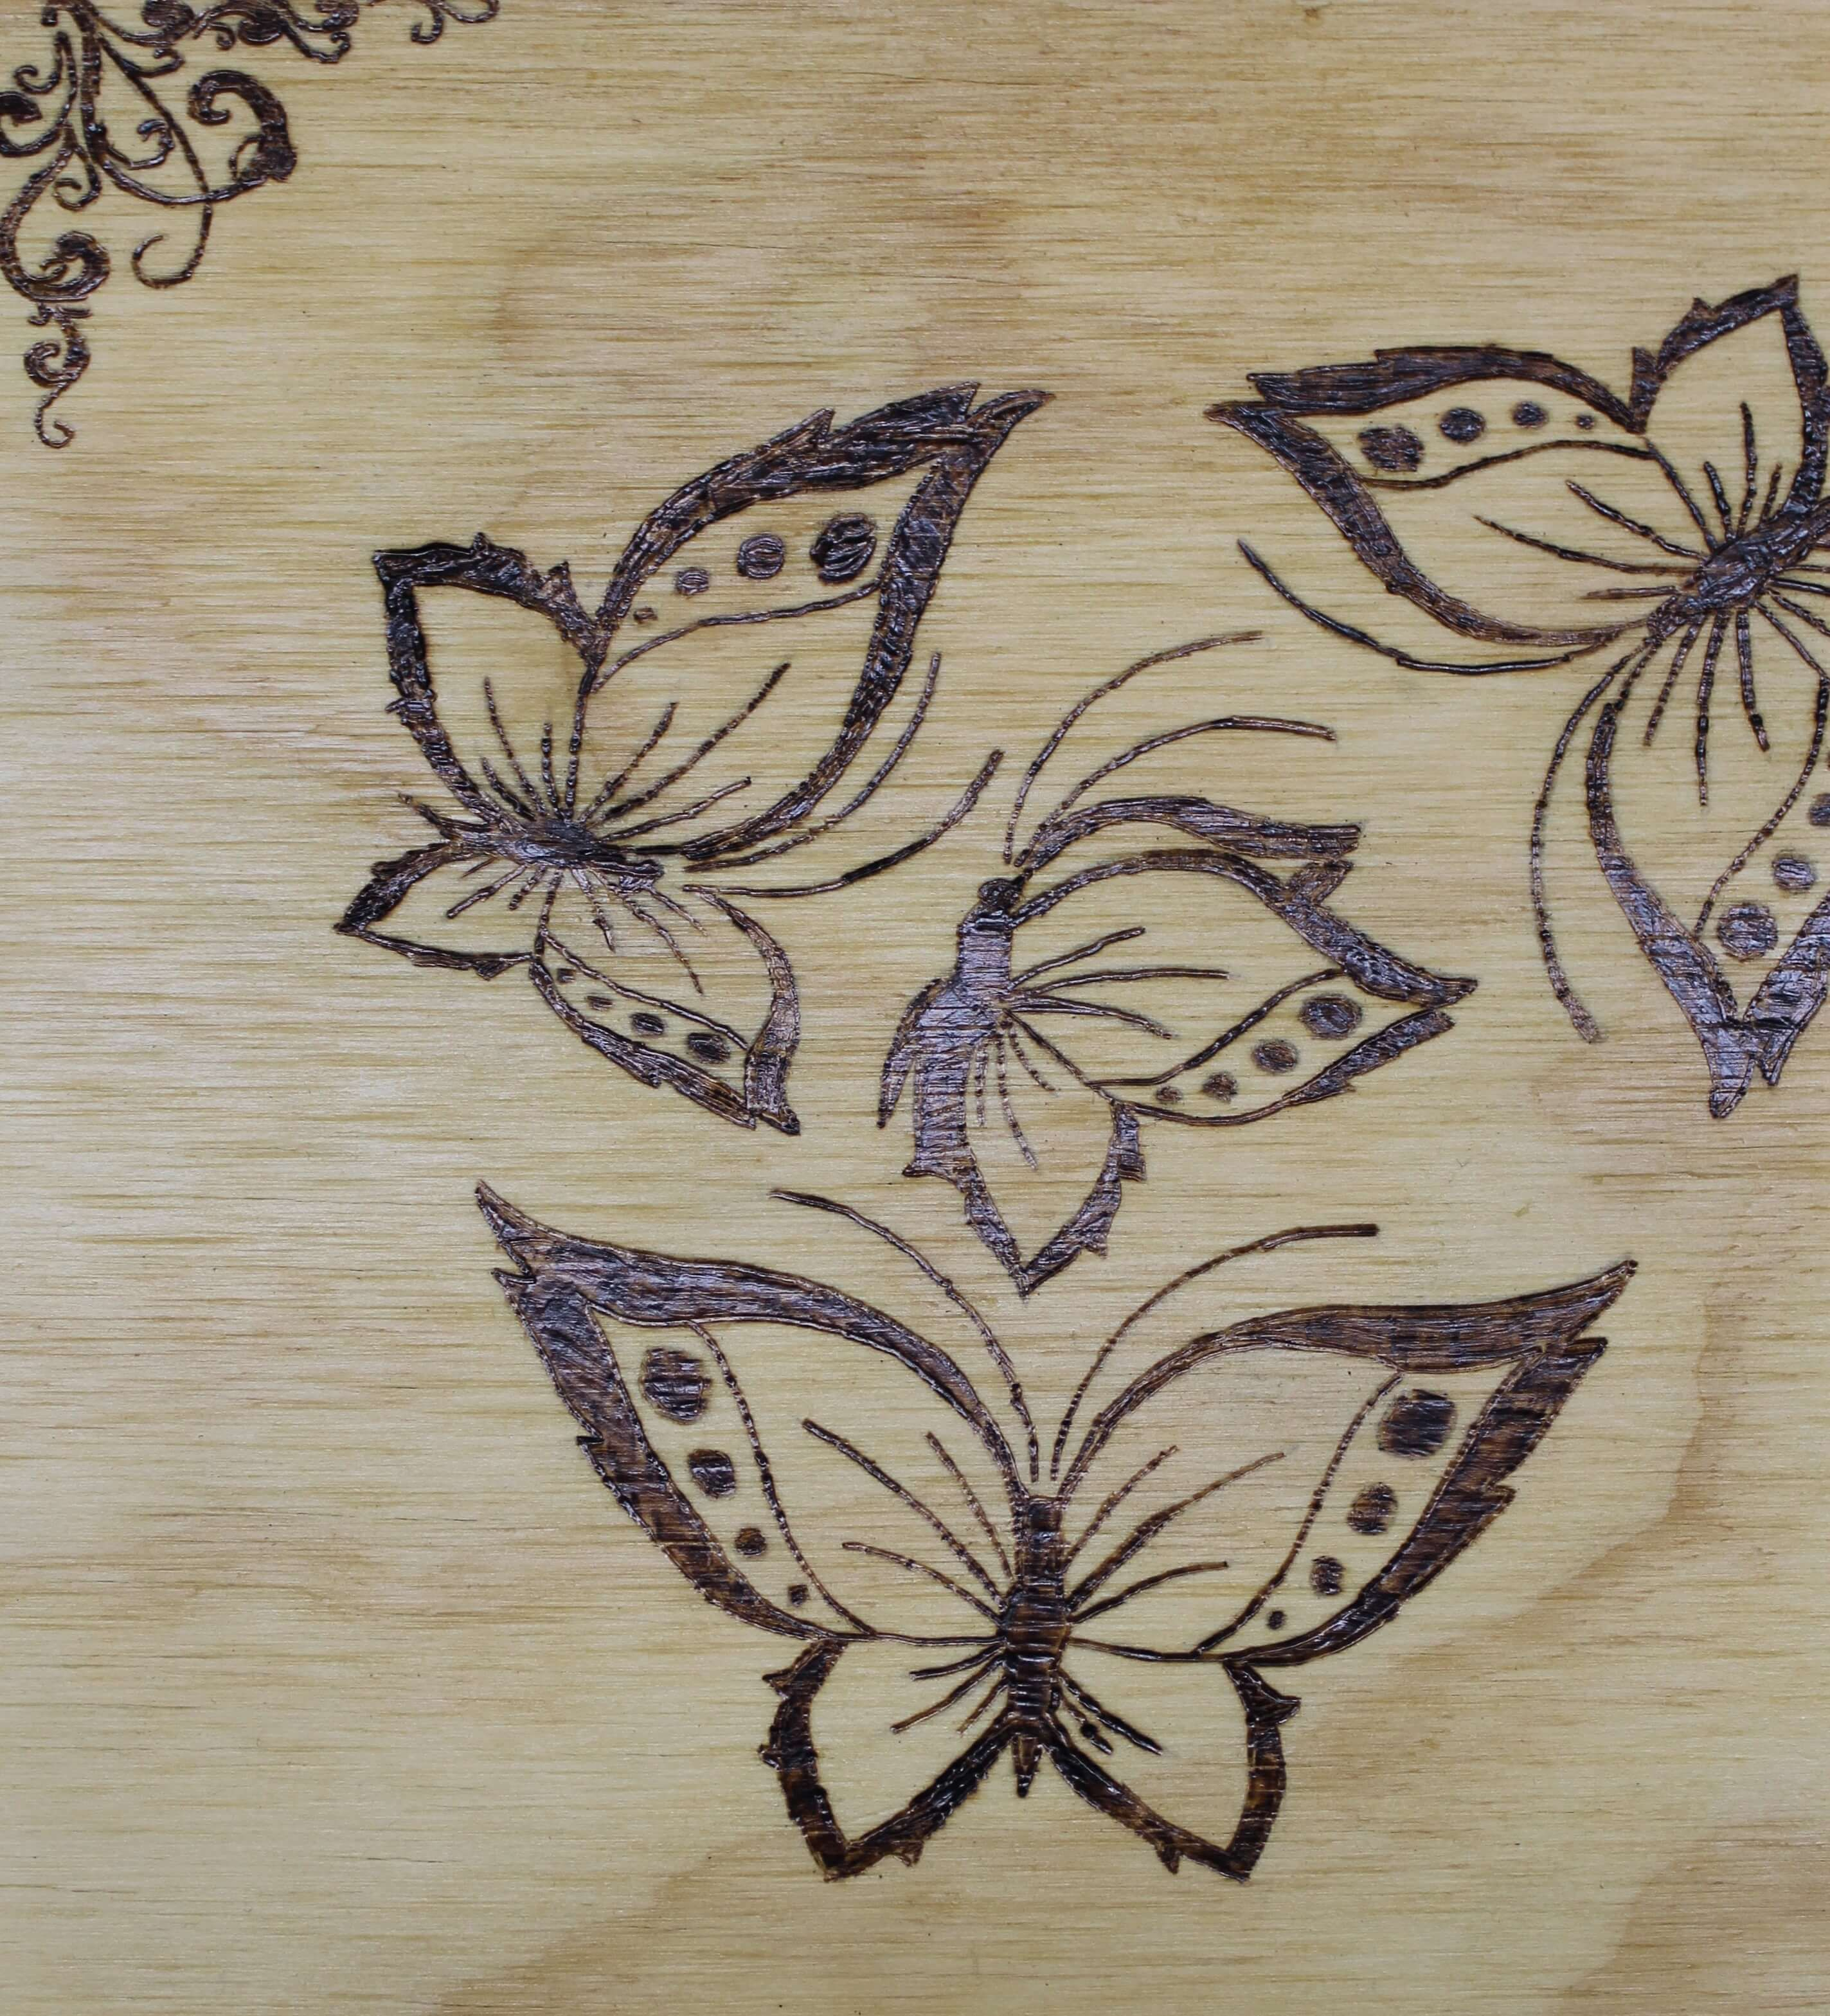 20 Free Printable Wood Burning Patterns For Beginners | Woodburning - Free Printable Wood Burning Patterns For Beginners